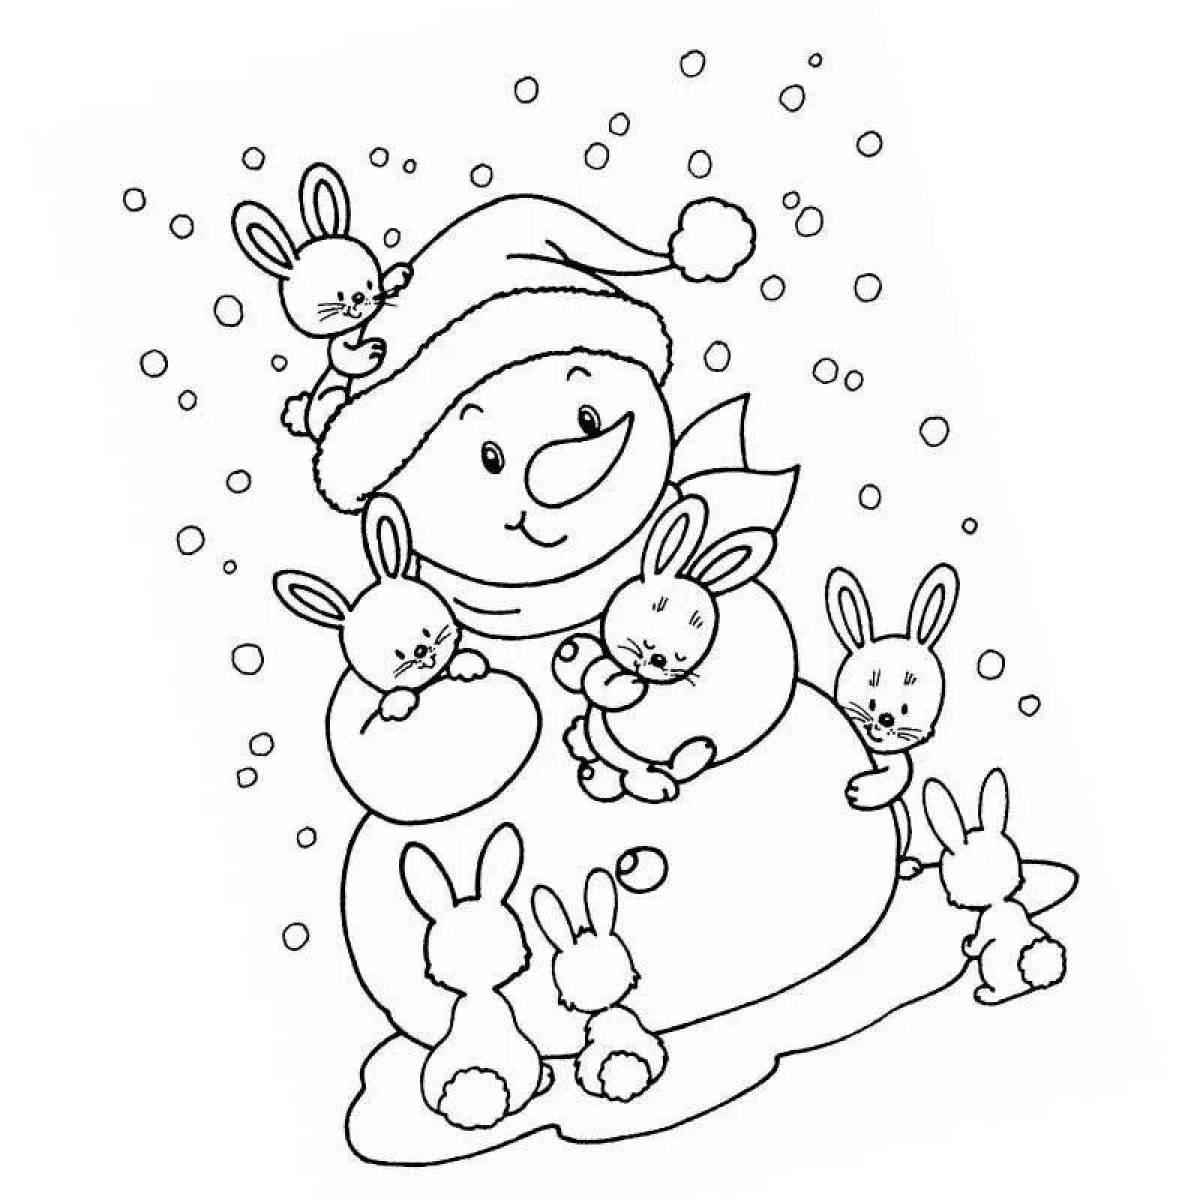 Coloring page adorable hare and snowman